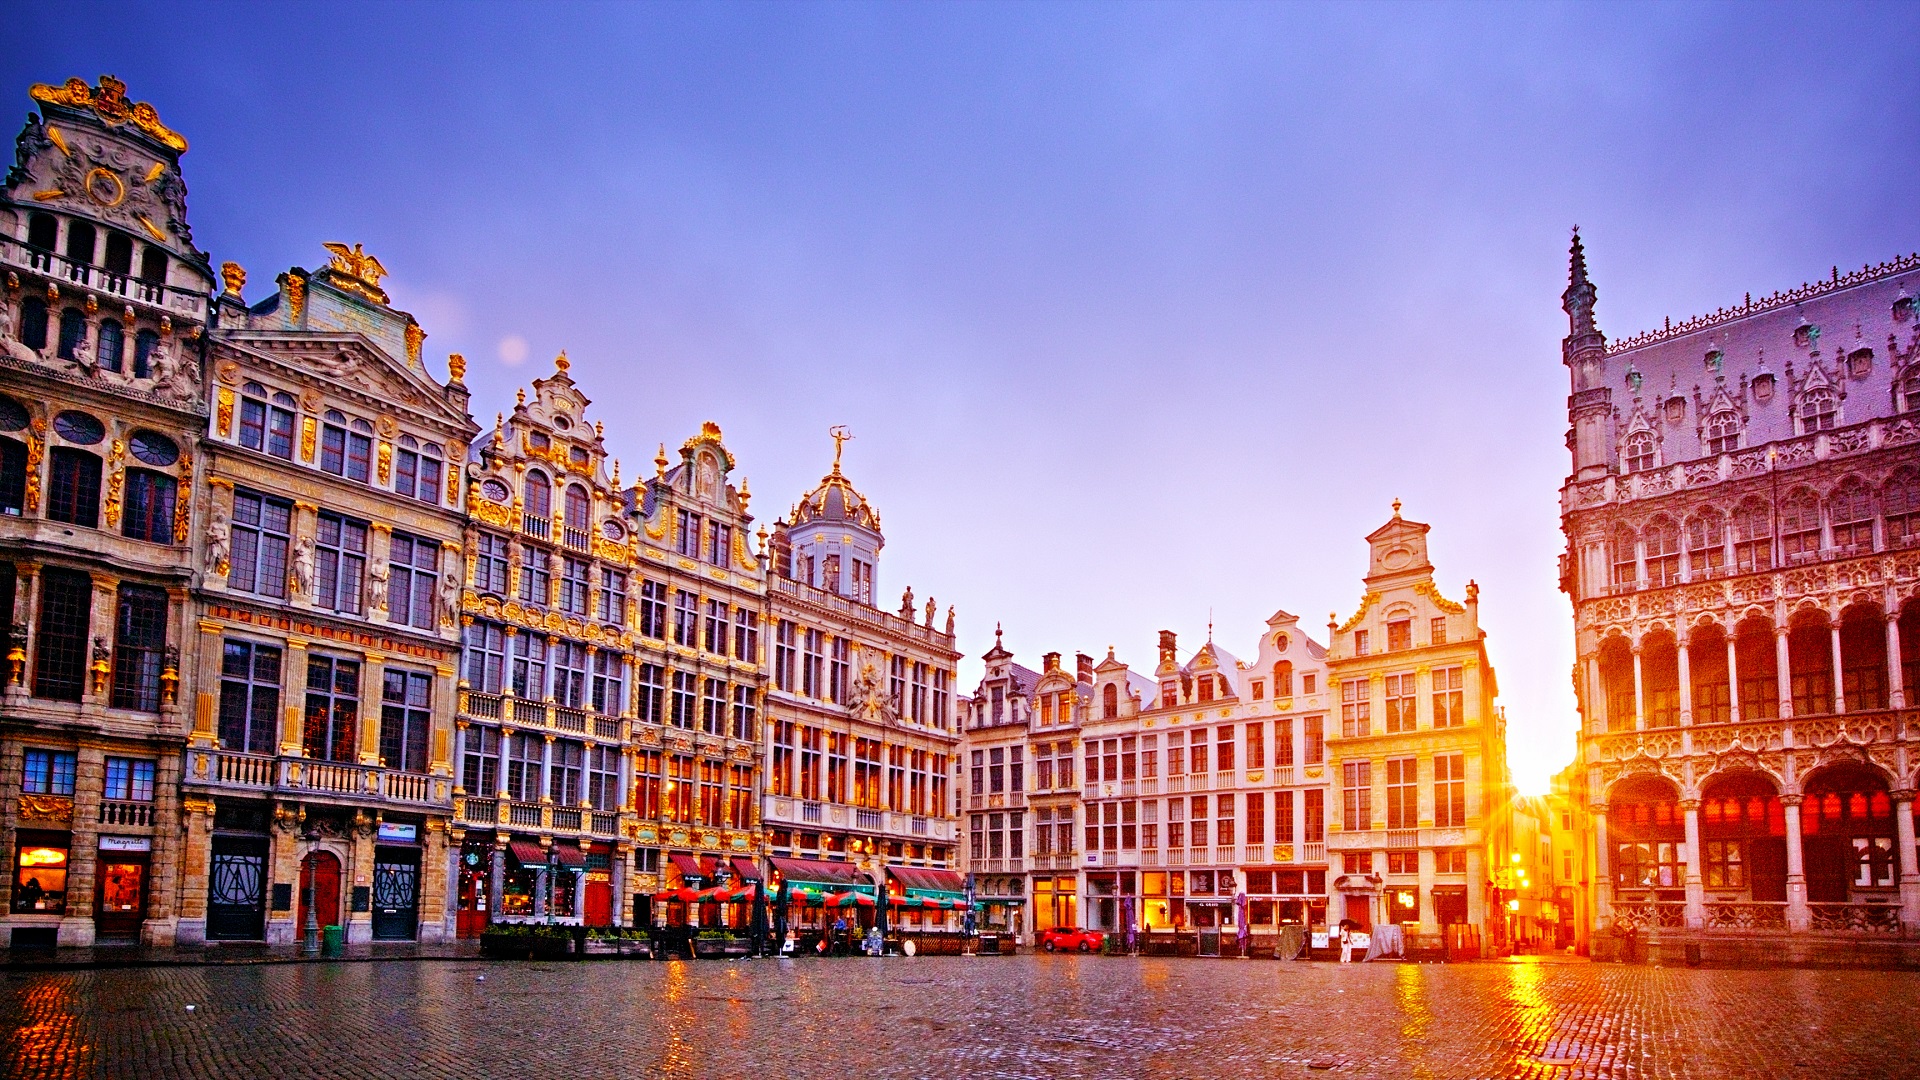 Grand-Place historic square in Brussels in the evening